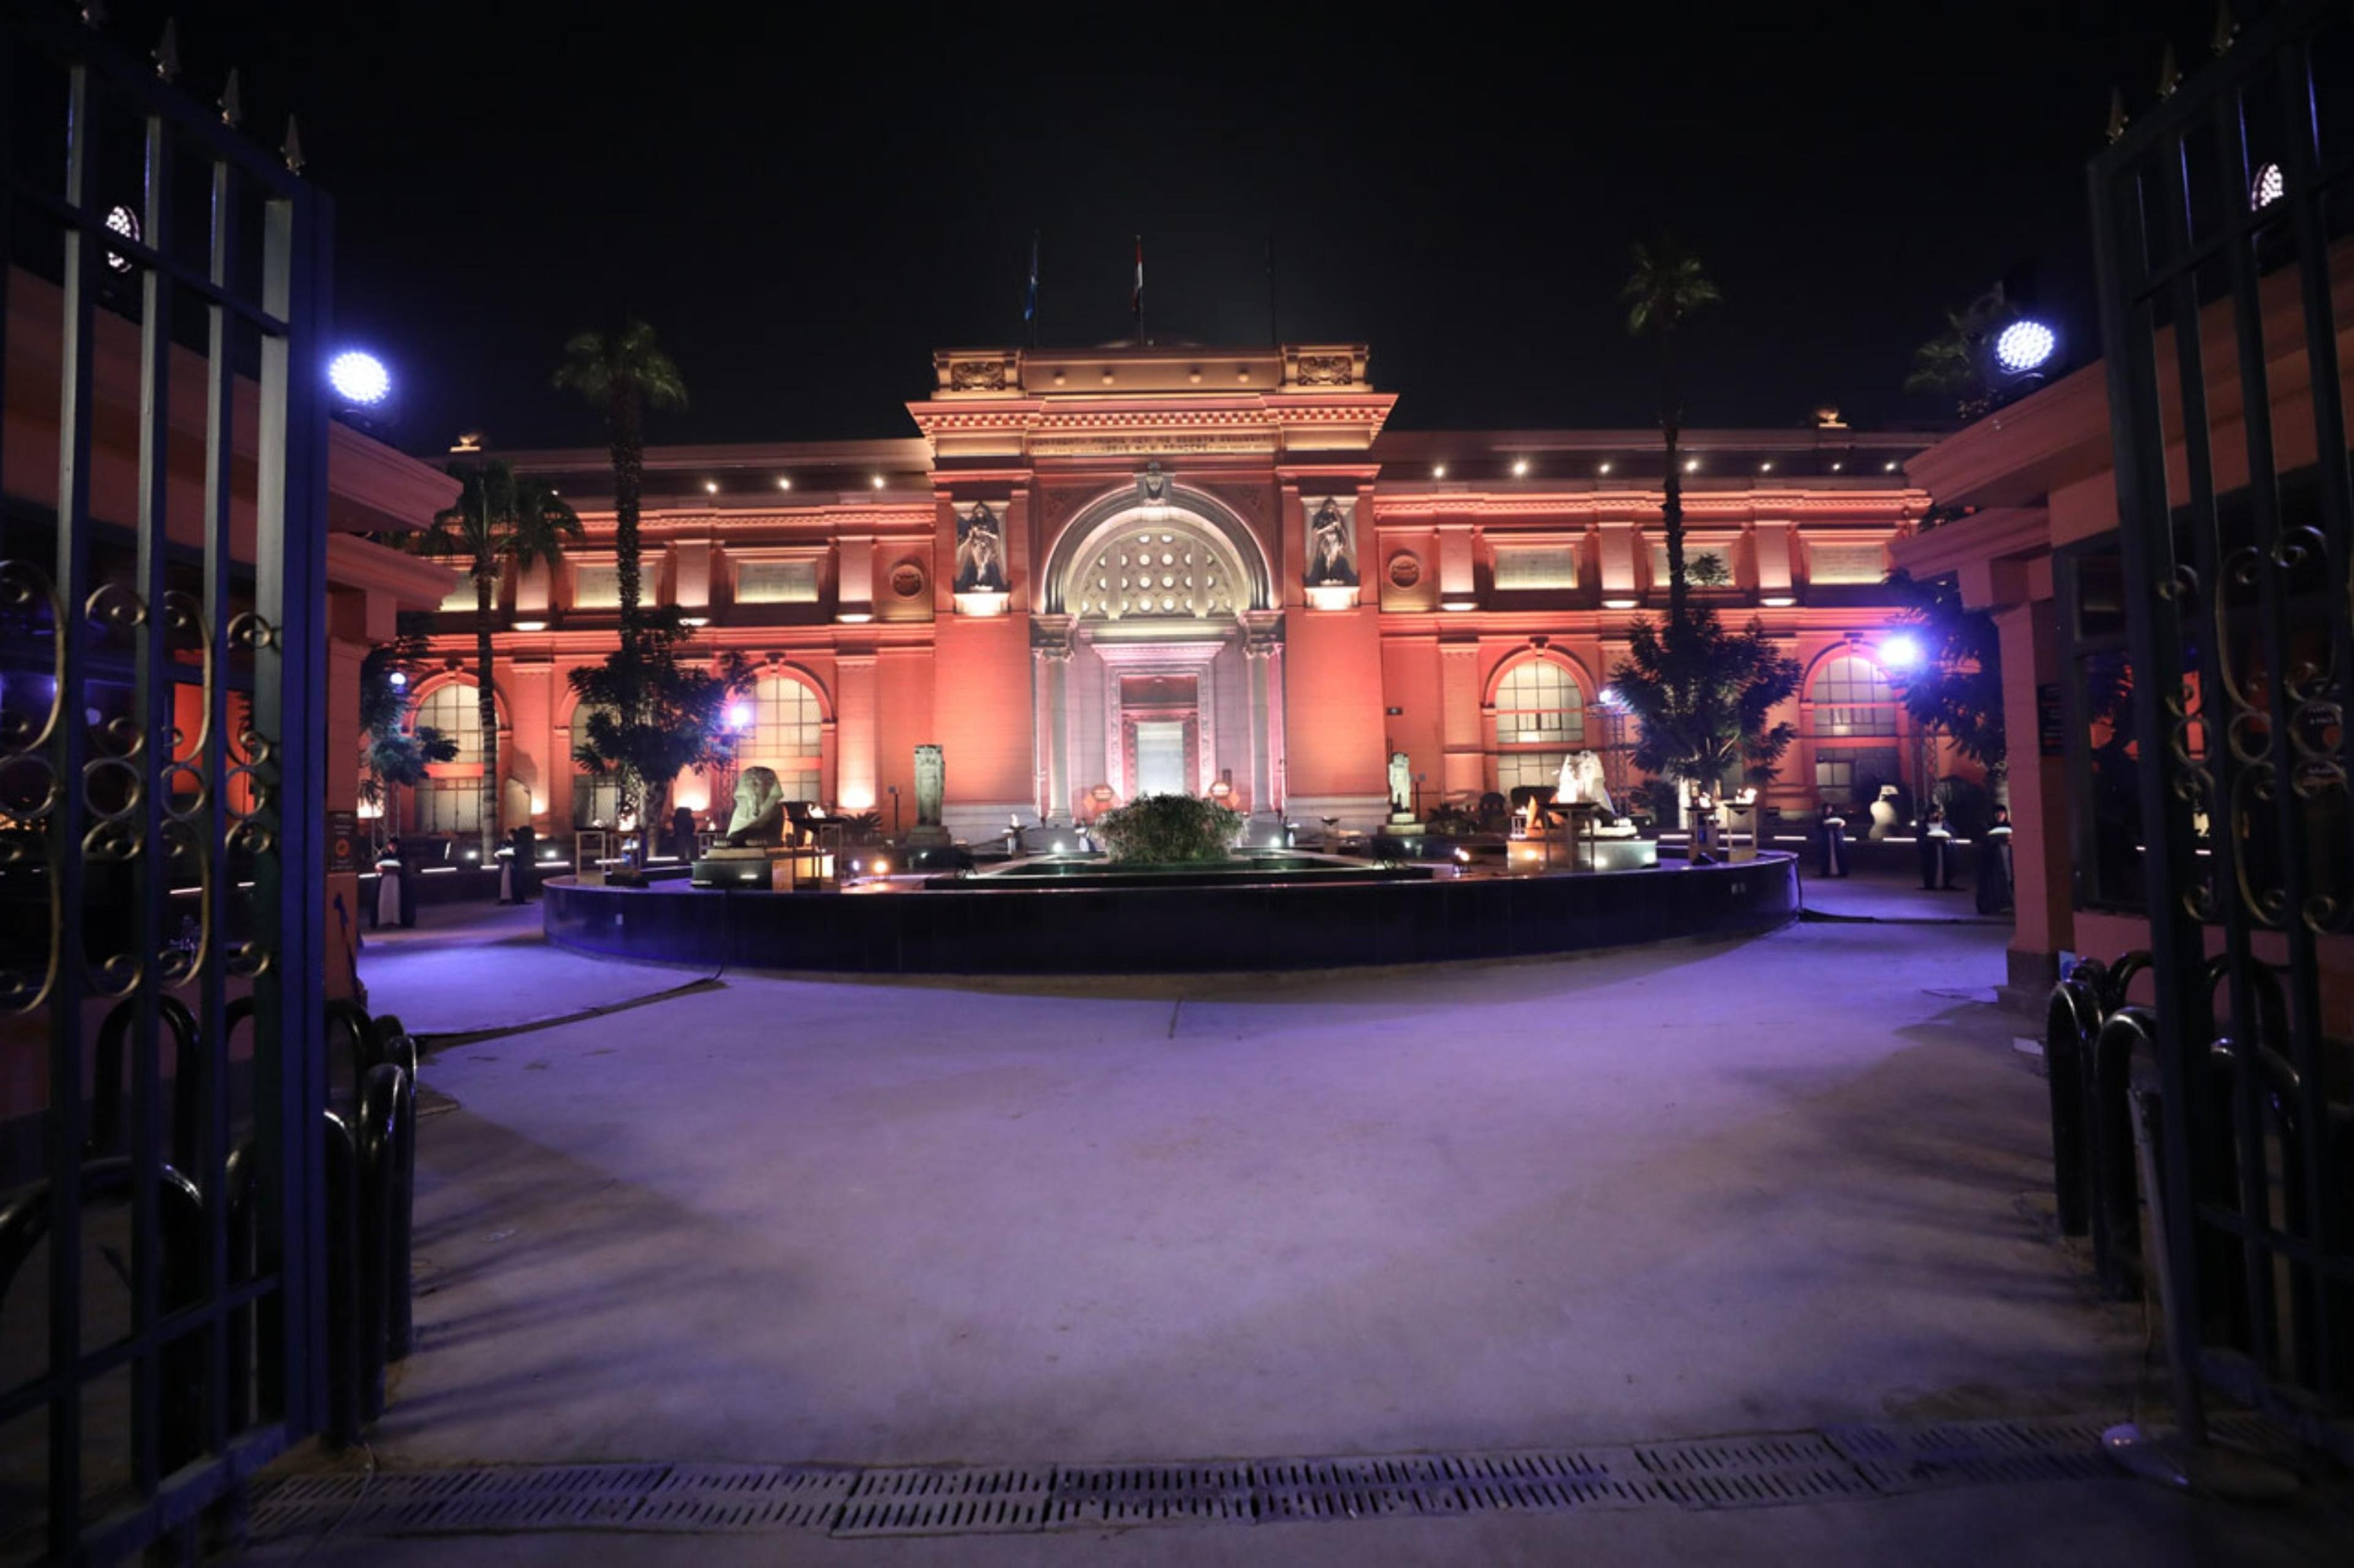 The Egyptian Museum in Cairo